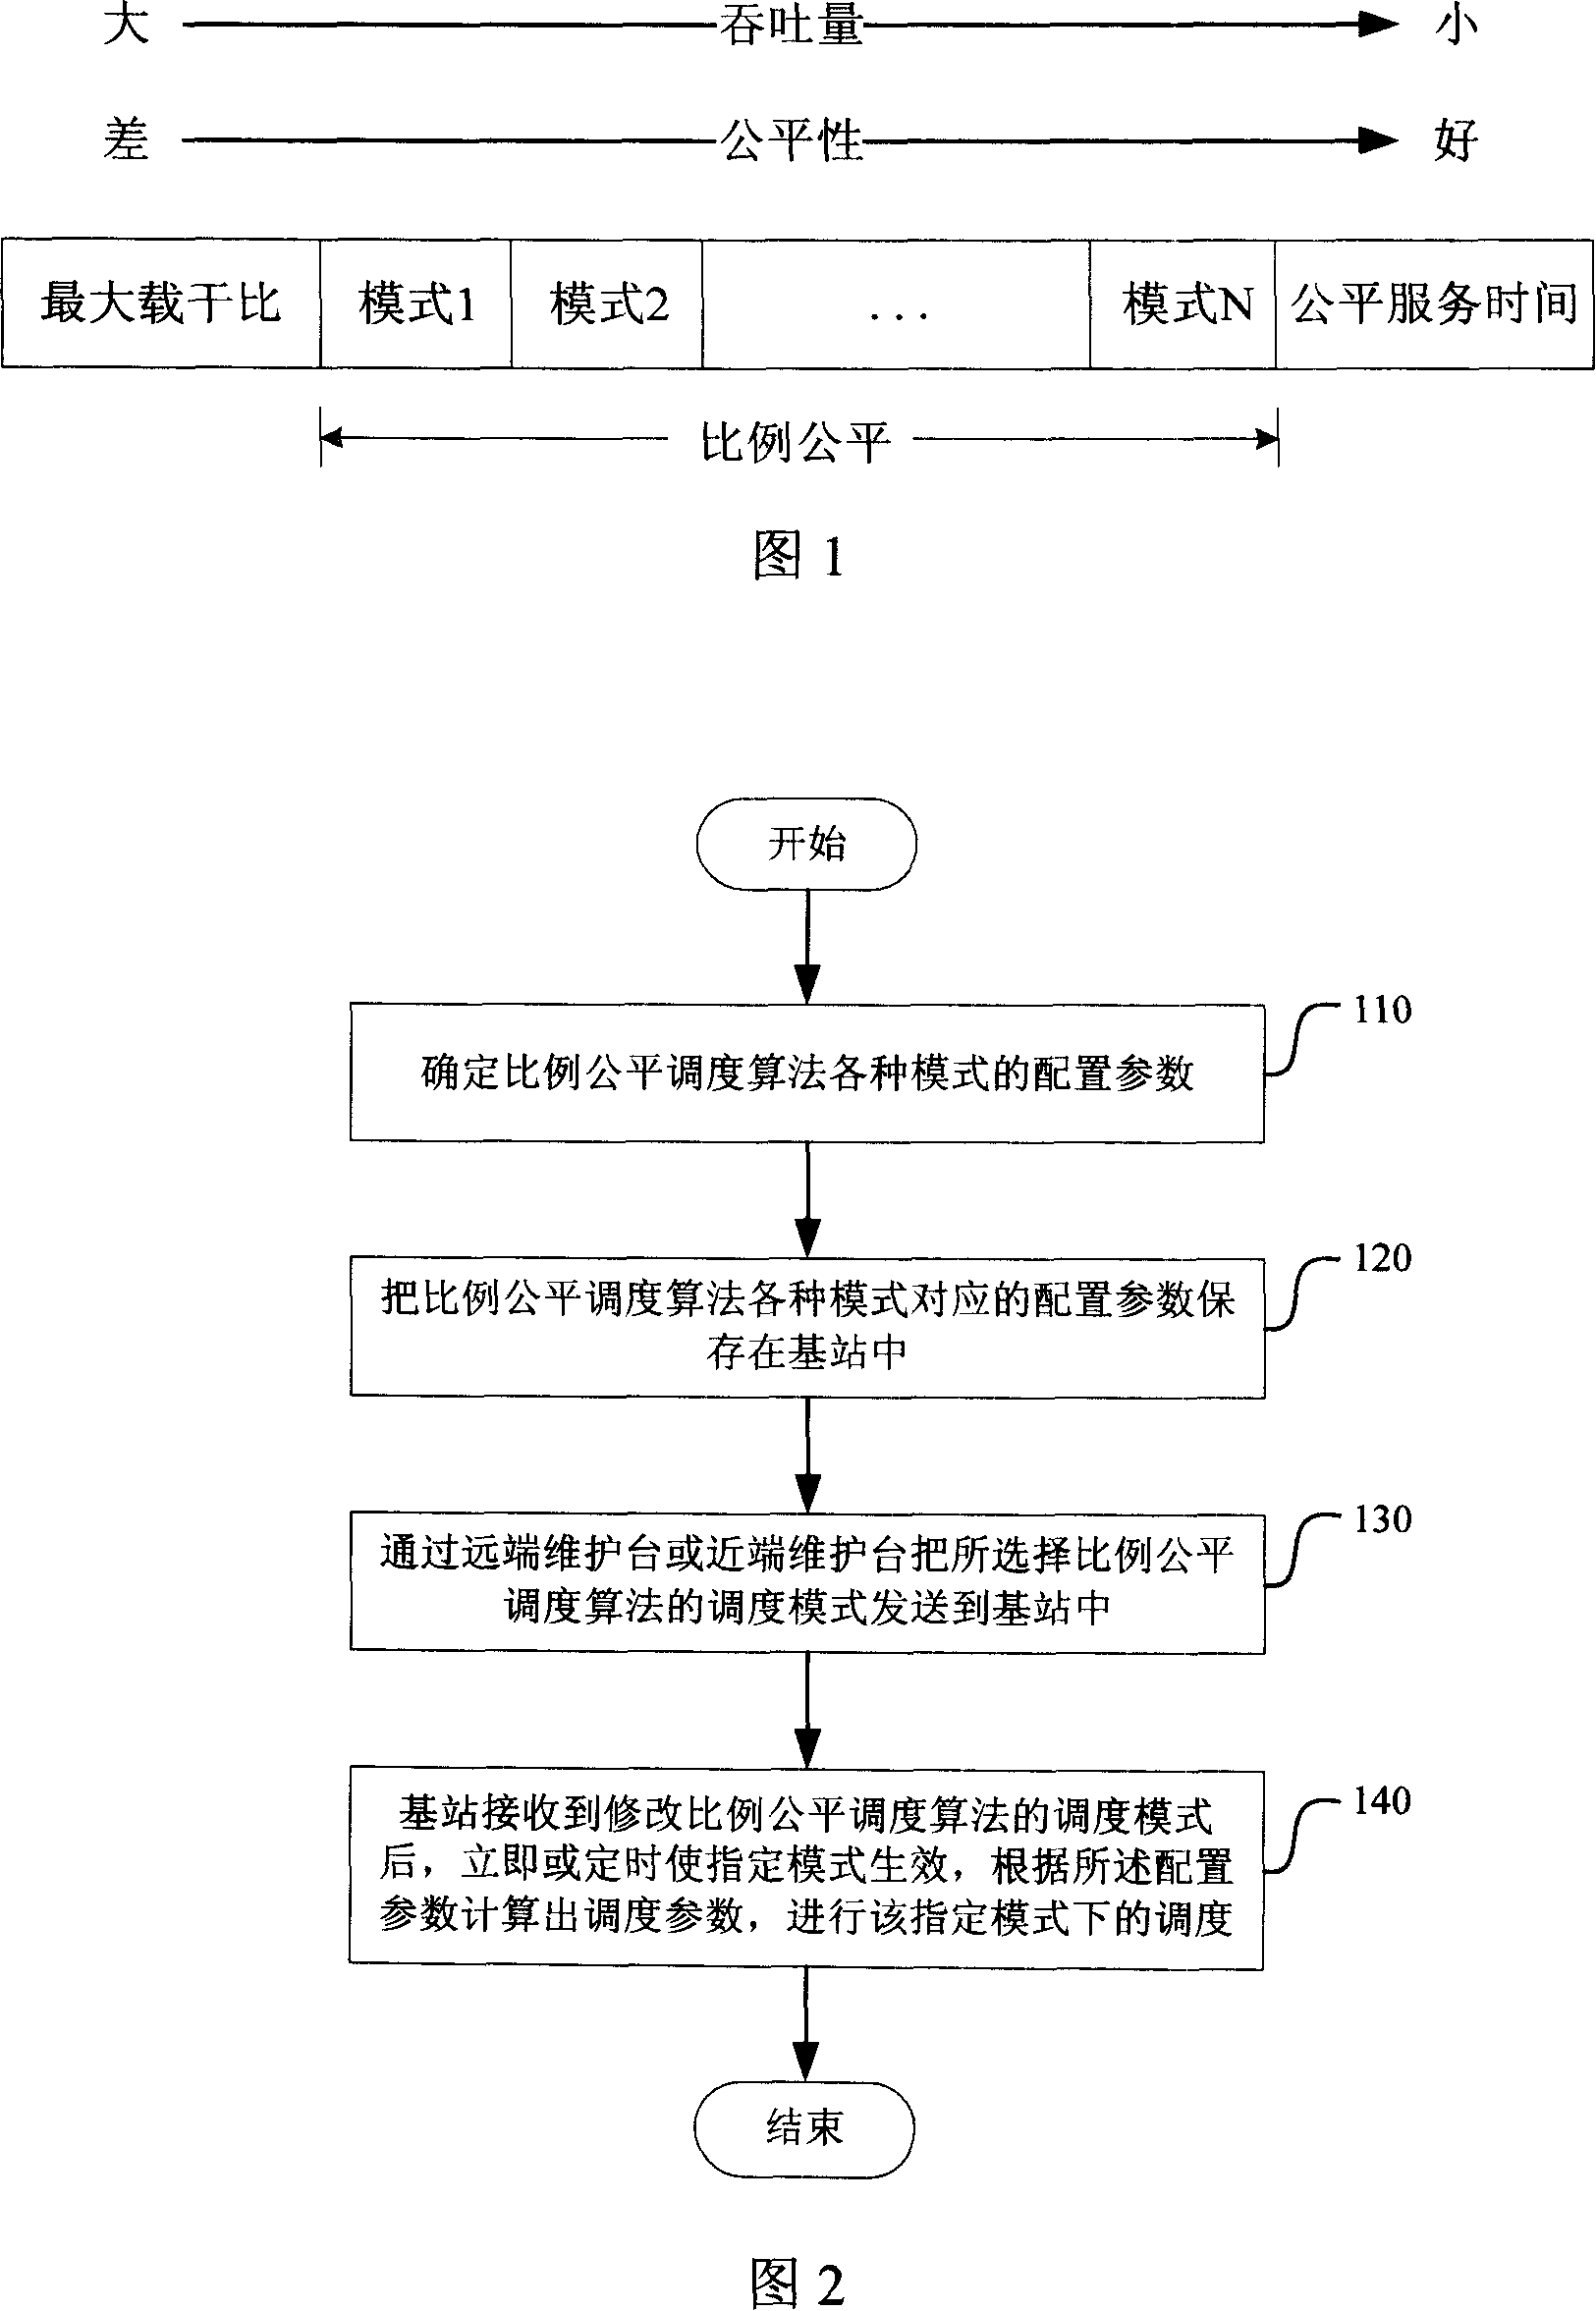 Proportional fair scheduling algorithm multi-mode configuration and scheduling method